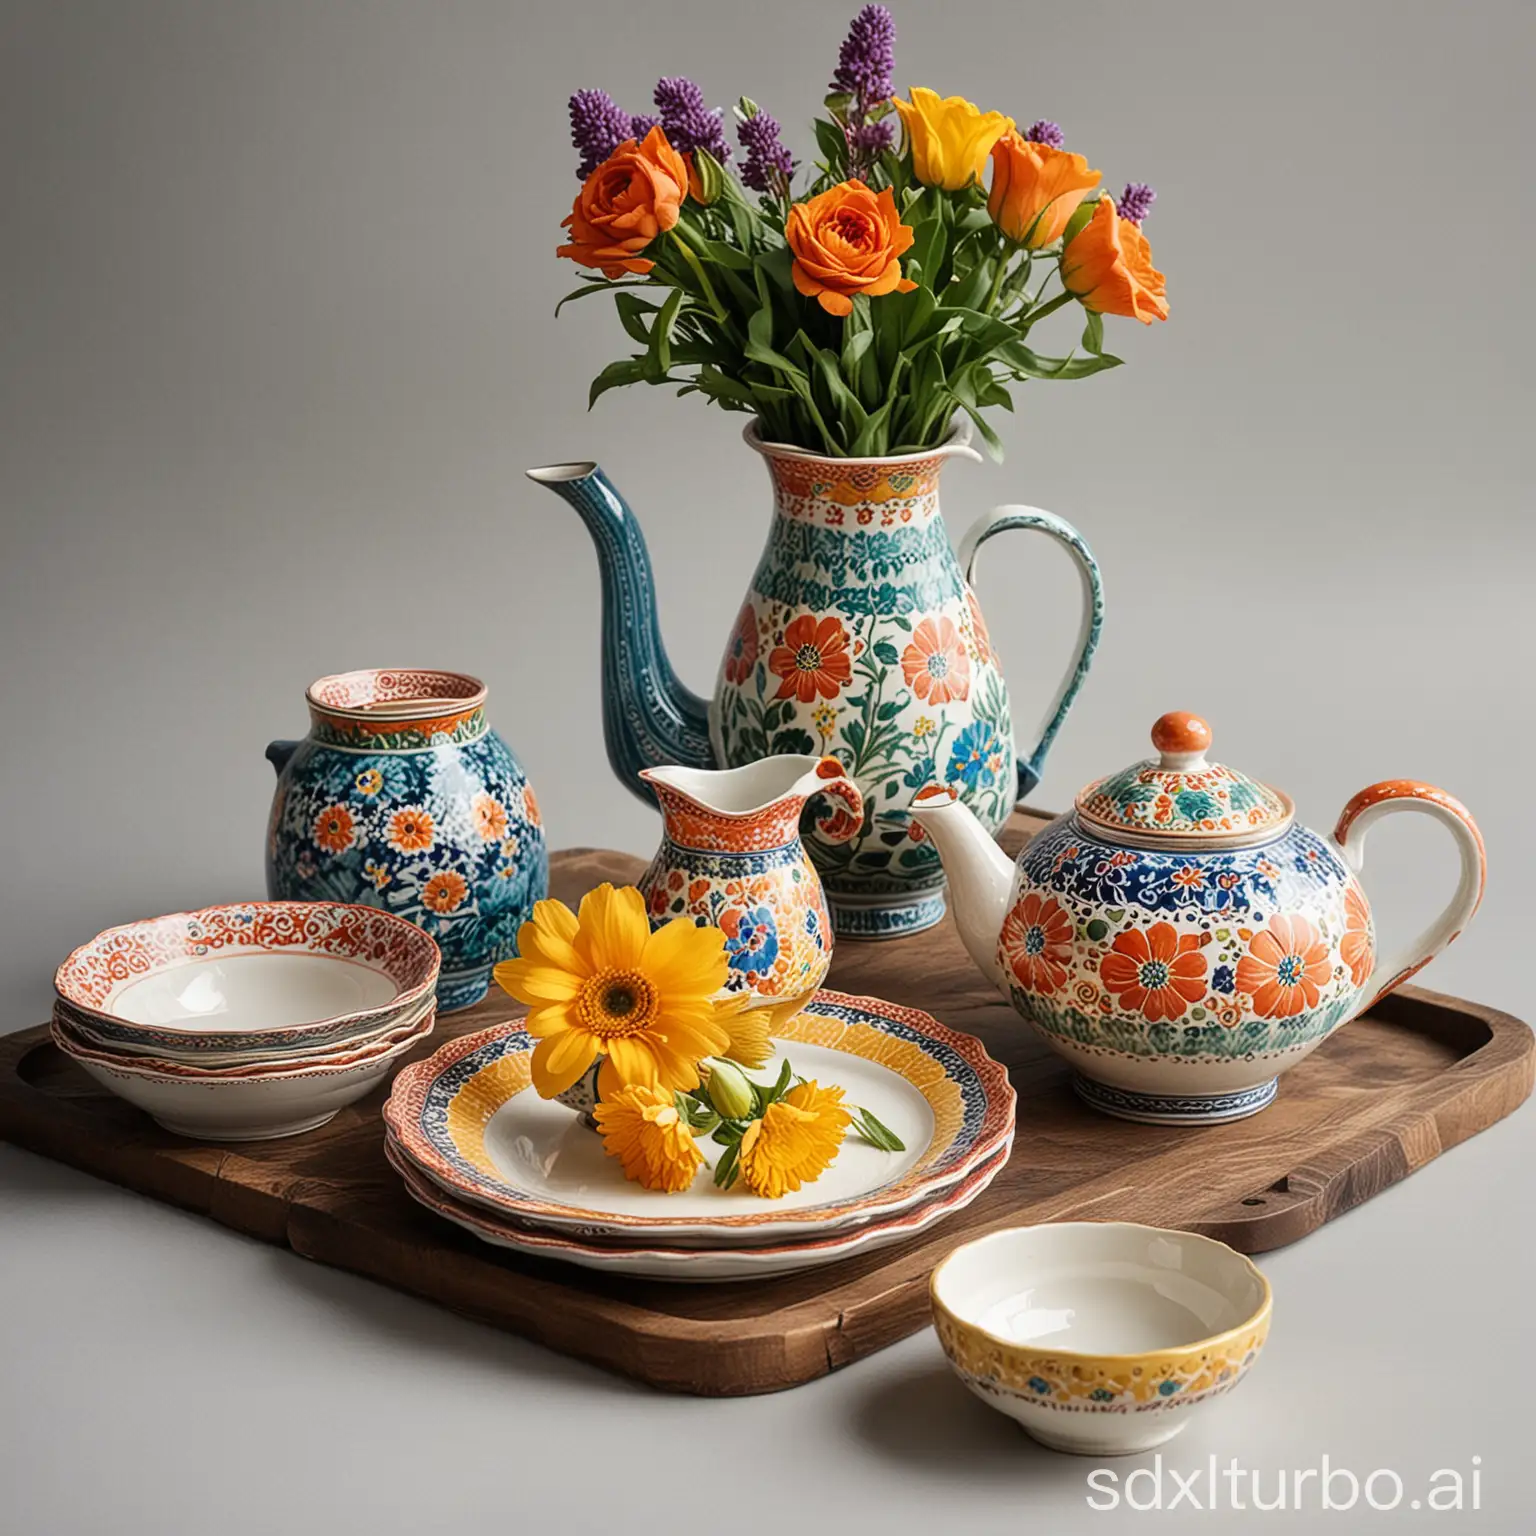 Table-Setting-with-Teapot-and-Vase-of-Colorful-Flowers